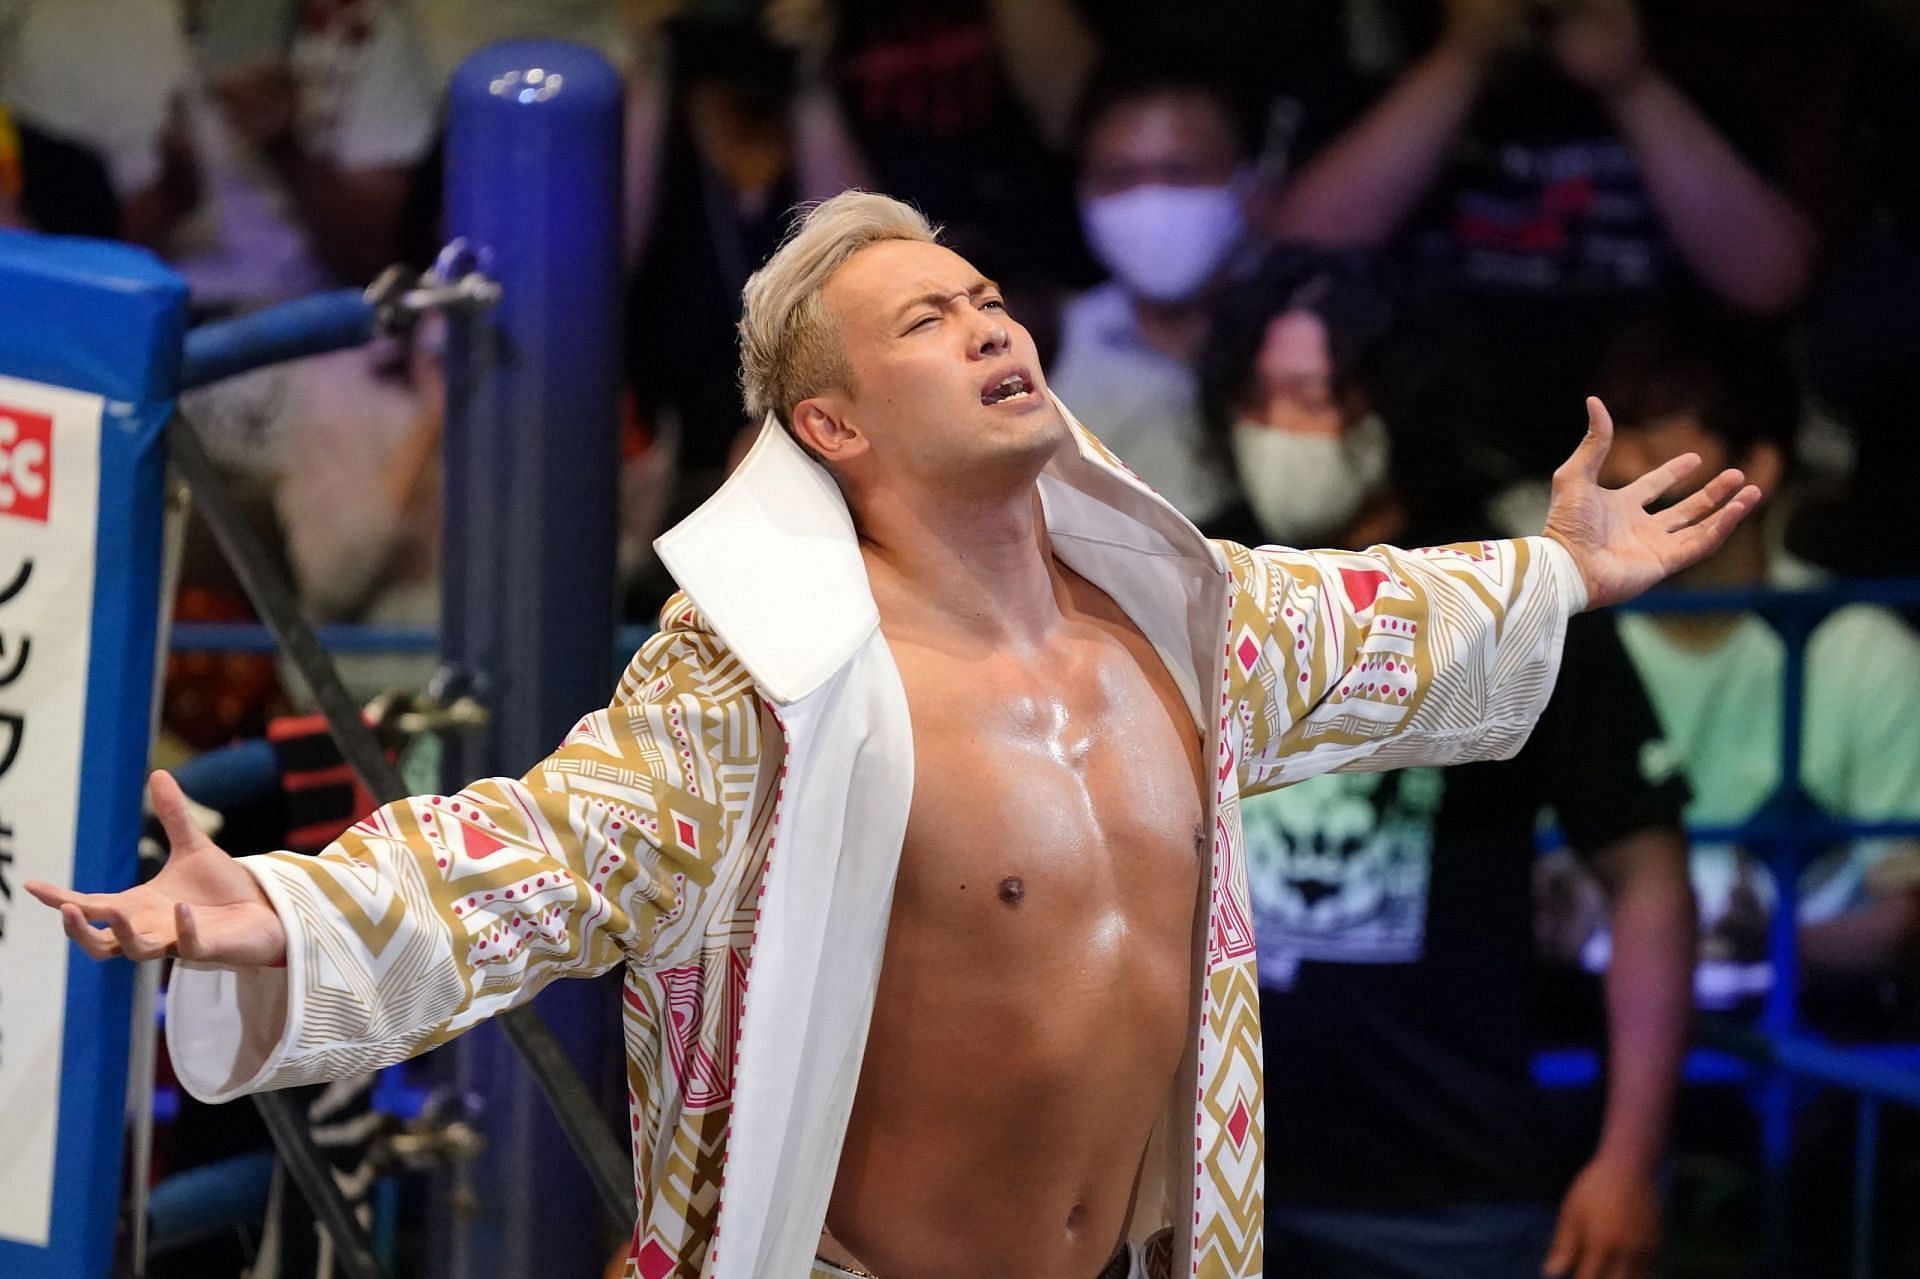 Okada has a great look in addition to being a great athlete.